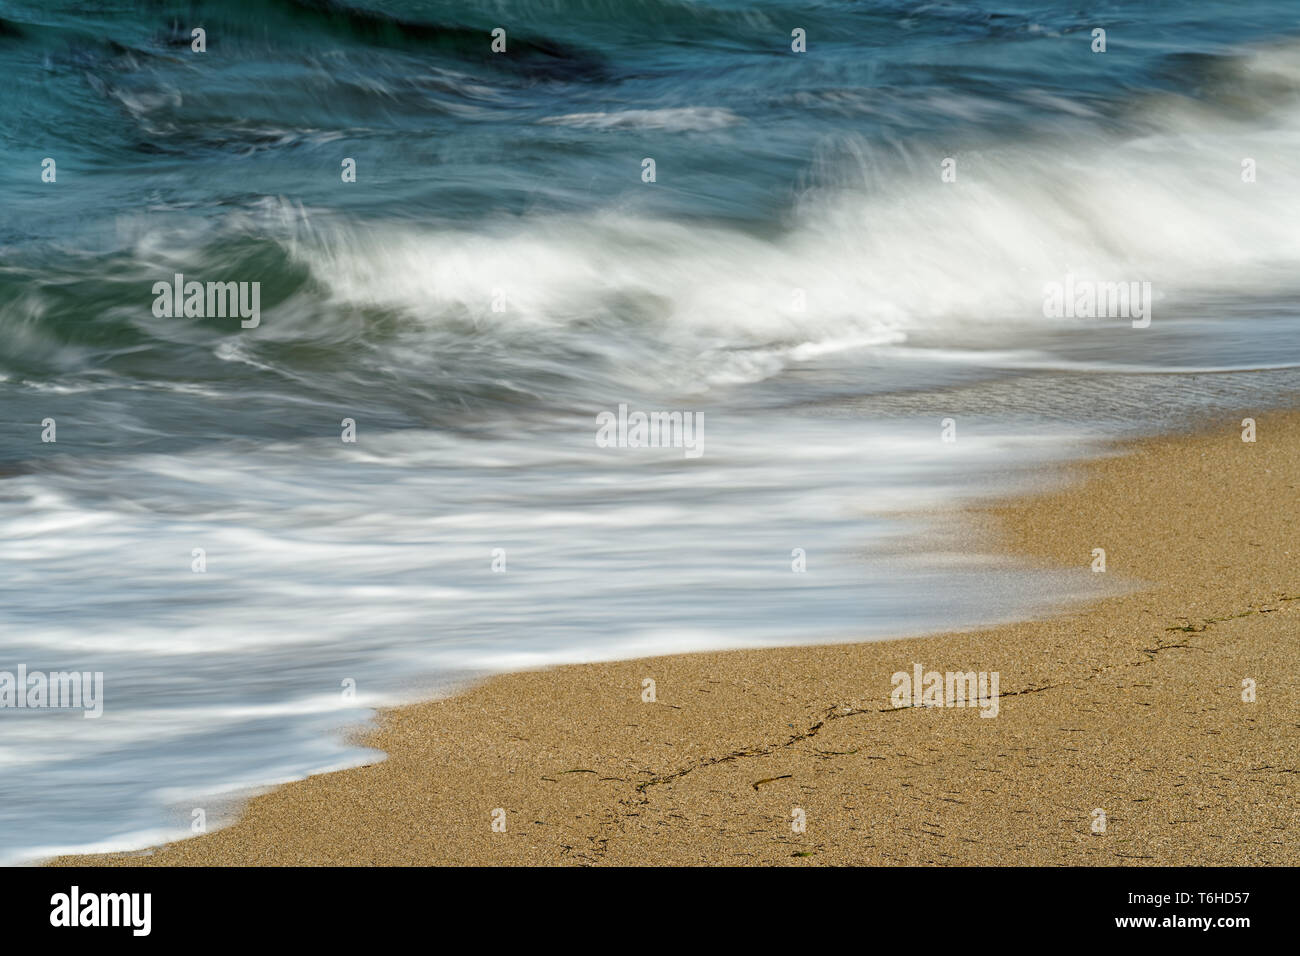 Detail view of a wave, which runs out on a sandy beach, the blue color of the sky is reflected in the water, some washed-up seagrass on the sand, wate Stock Photo